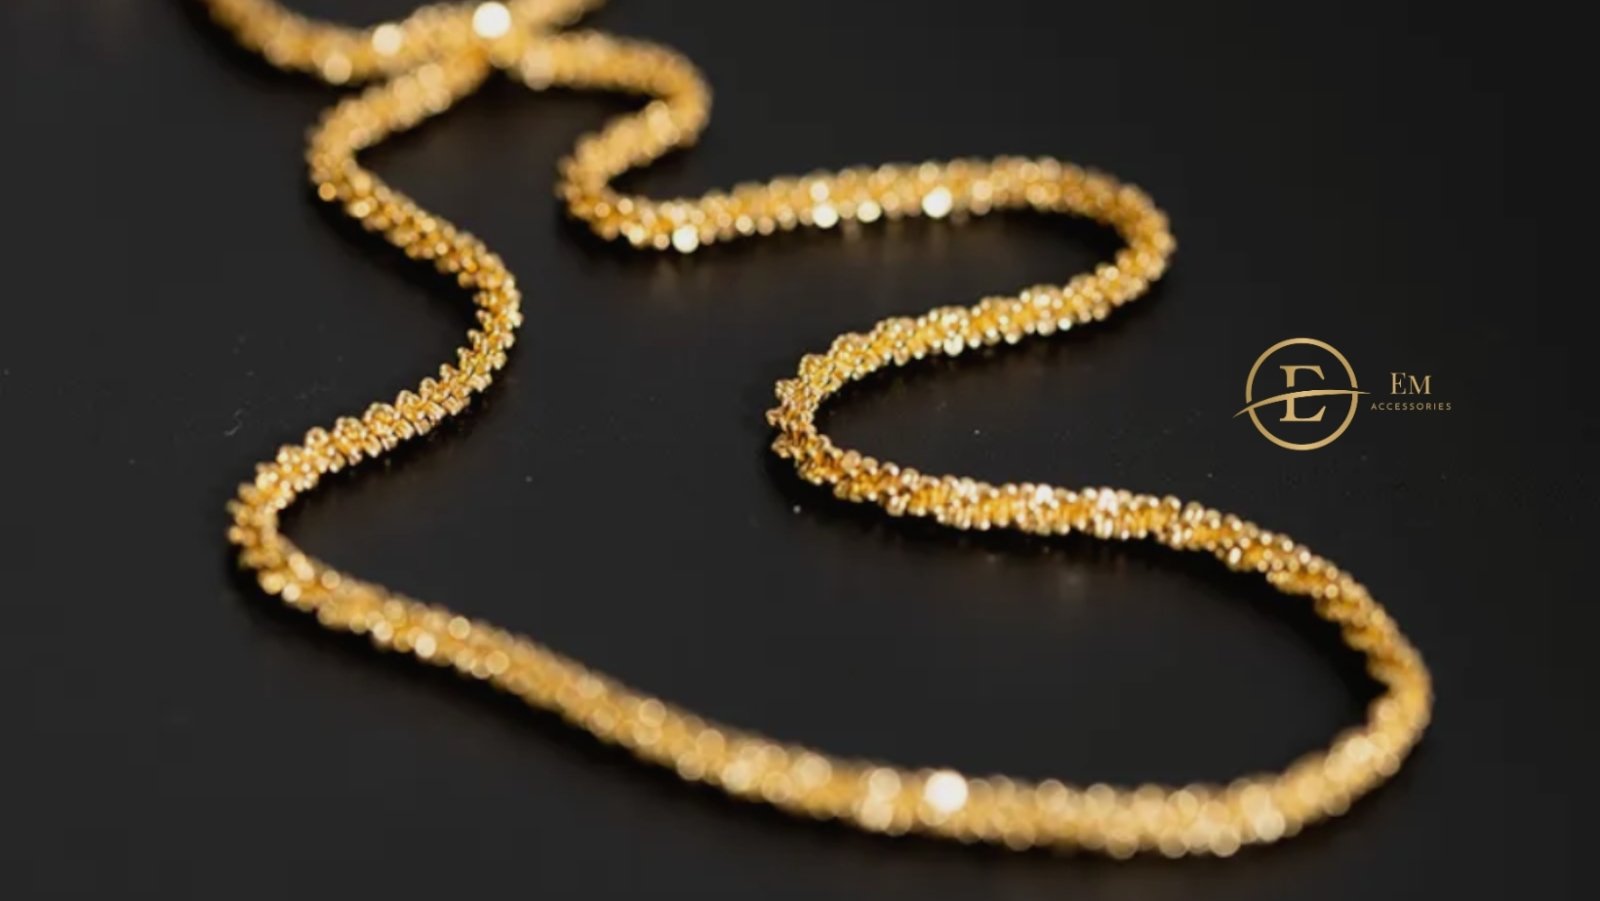 a close up of a gold women's necklace chain